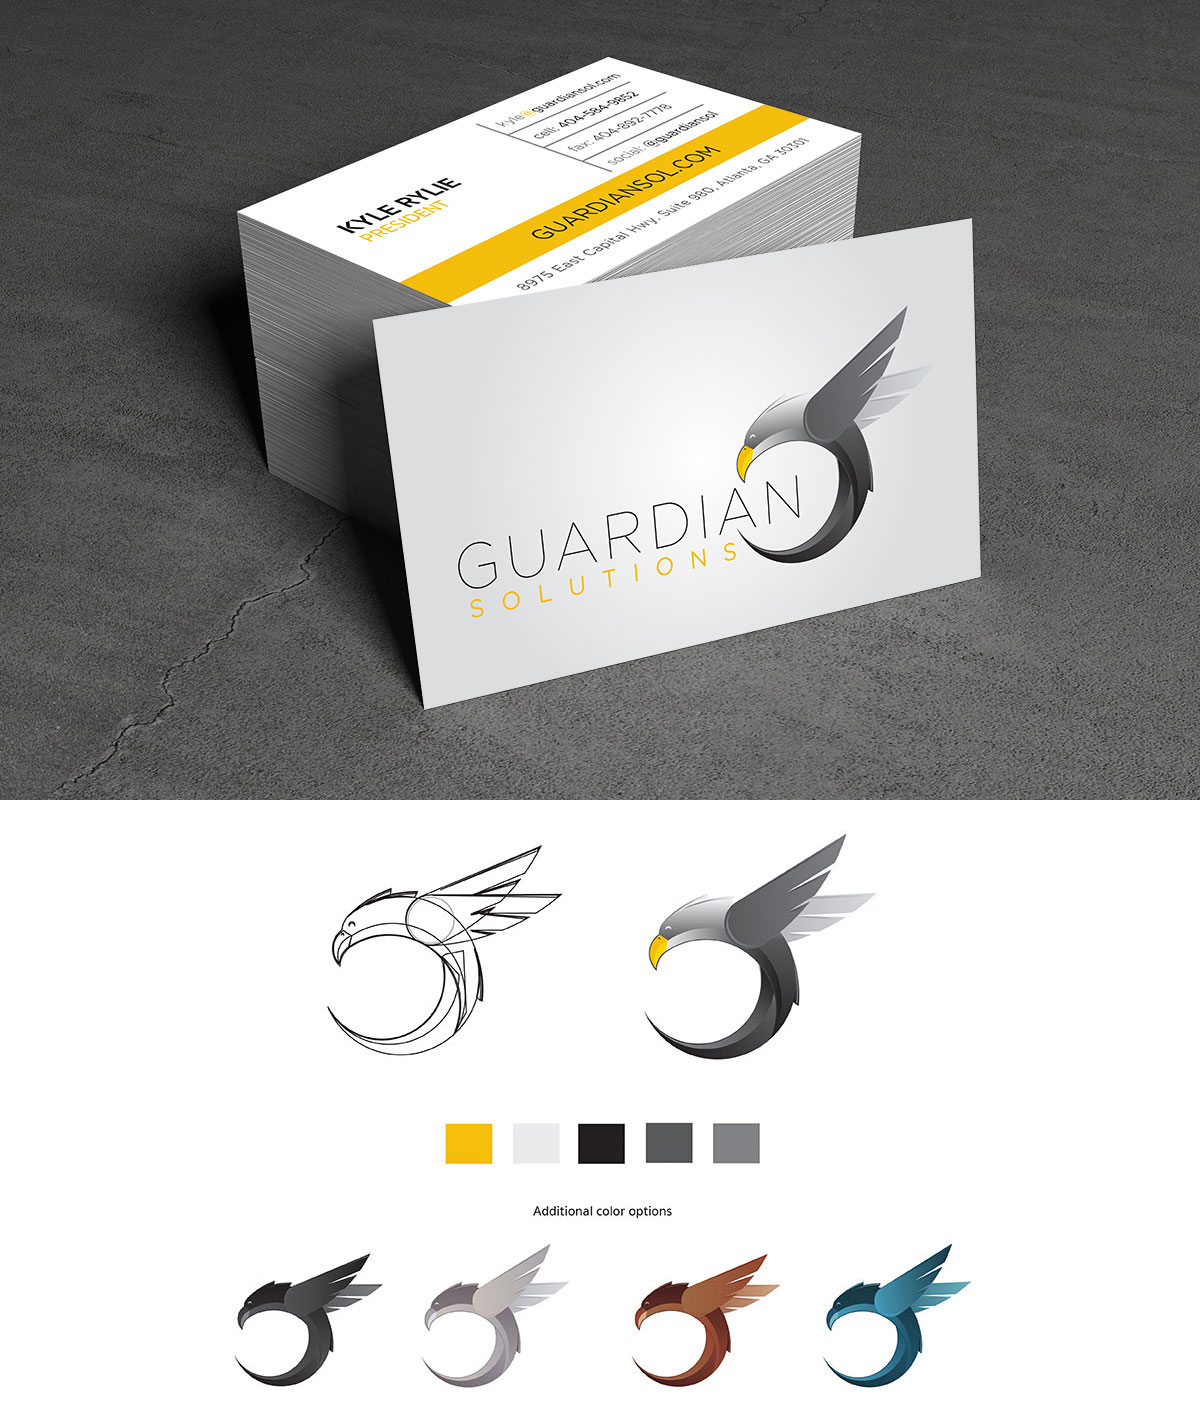 After going over the background of the company, as well as the fundamentals of what they do/believe in, we decided than an eagle would the perfect symbol for Guardian. We discuss why the eagle and the color works best.